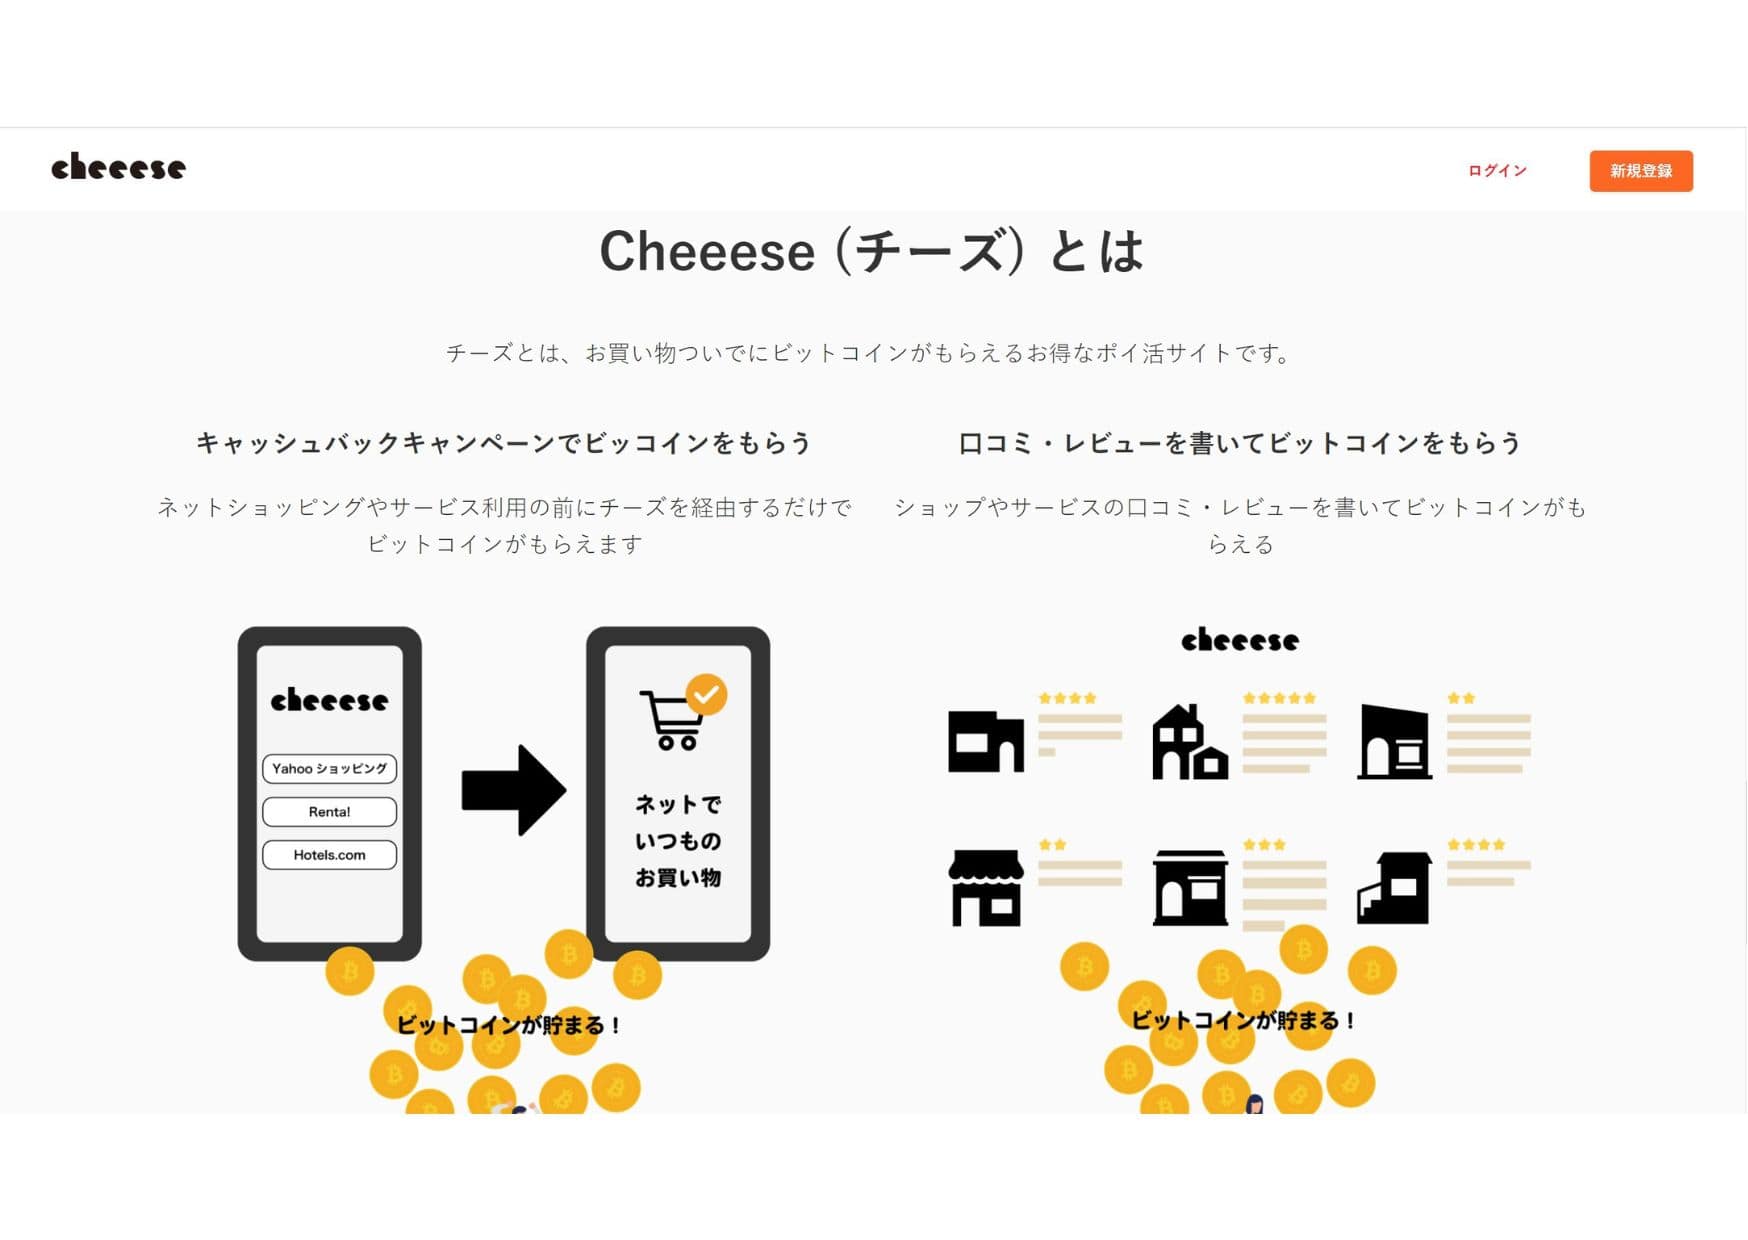 Cheeese アプリ